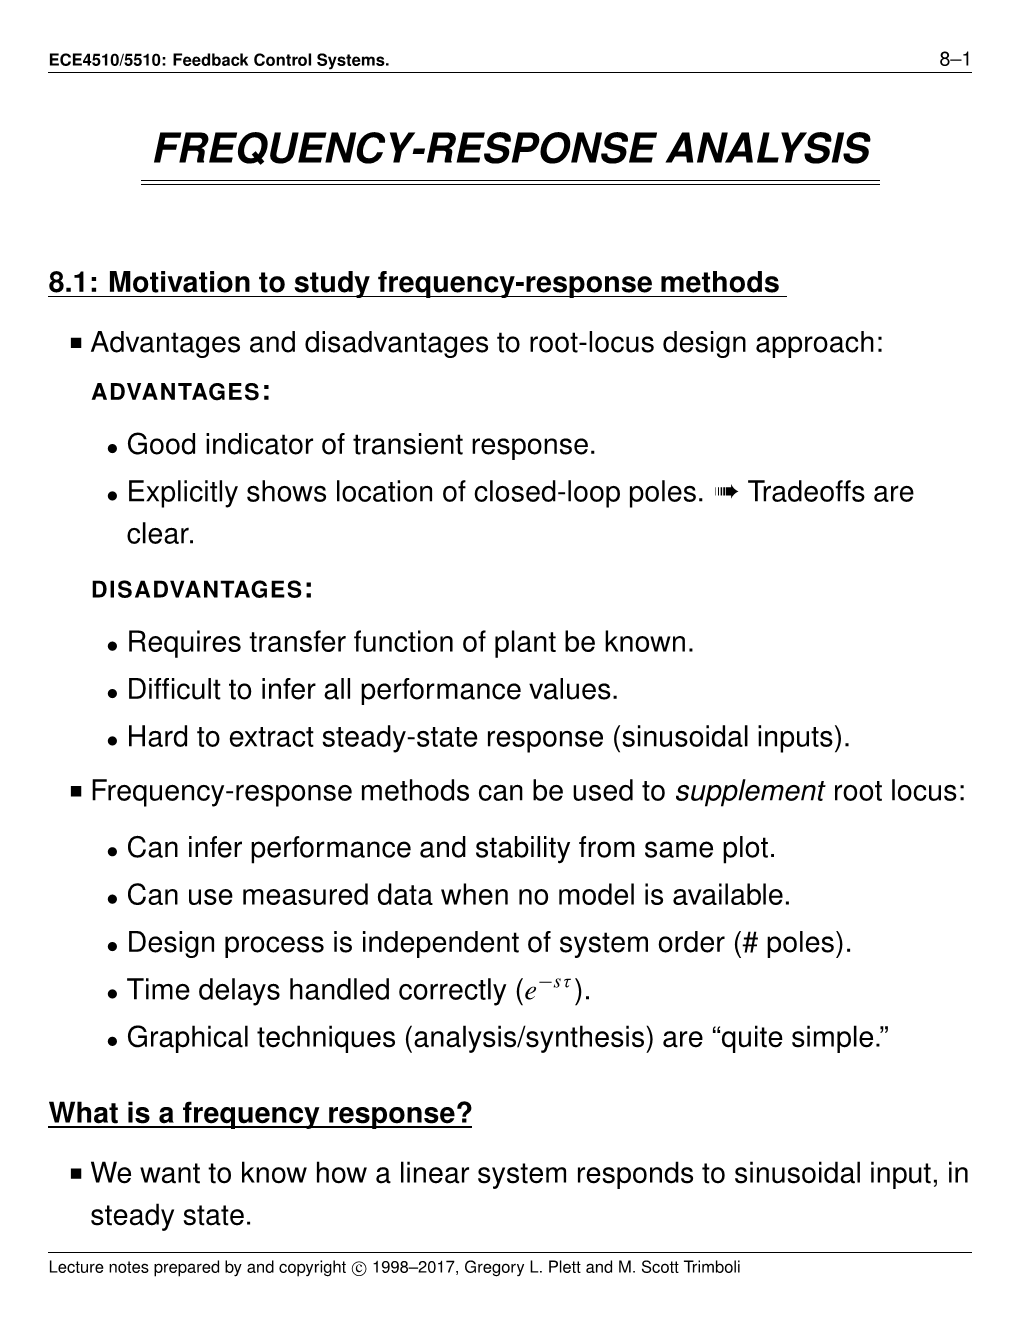 Frequency-Response Analysis